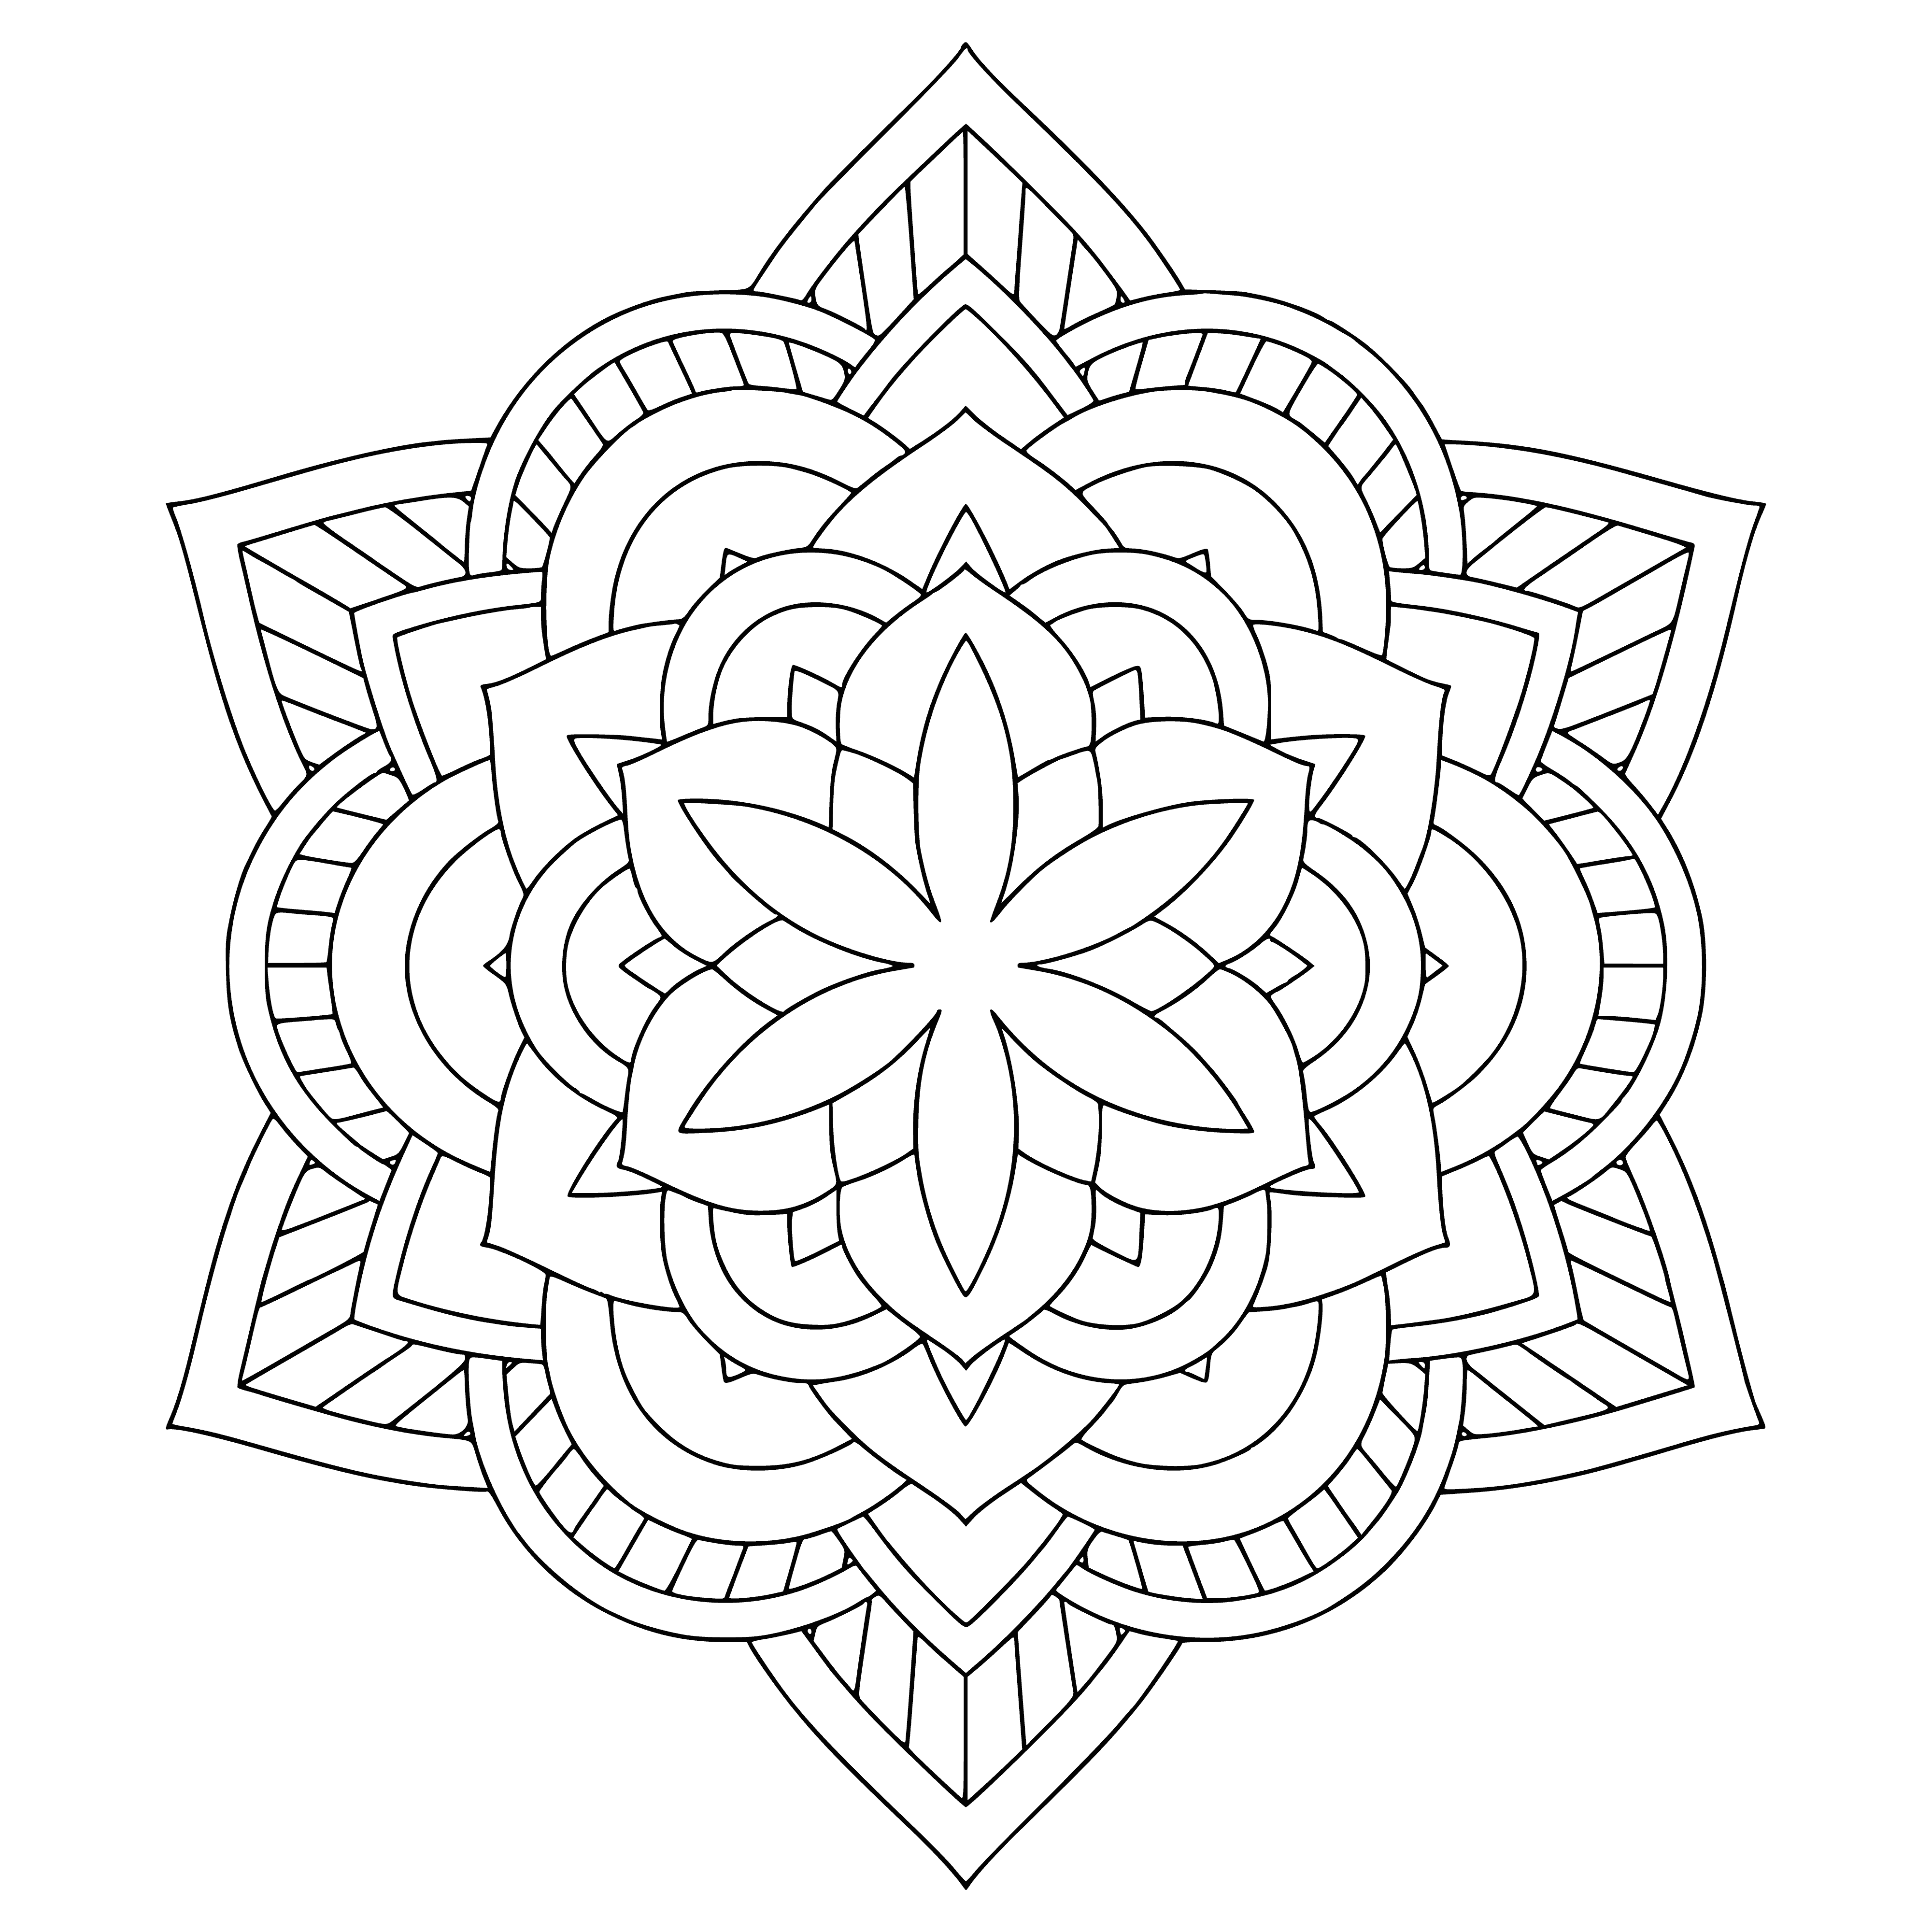 coloring page: Beautiful flower mandala made of roses, daisies, tulips and more in different colors, creating a symmetrical coloring page.